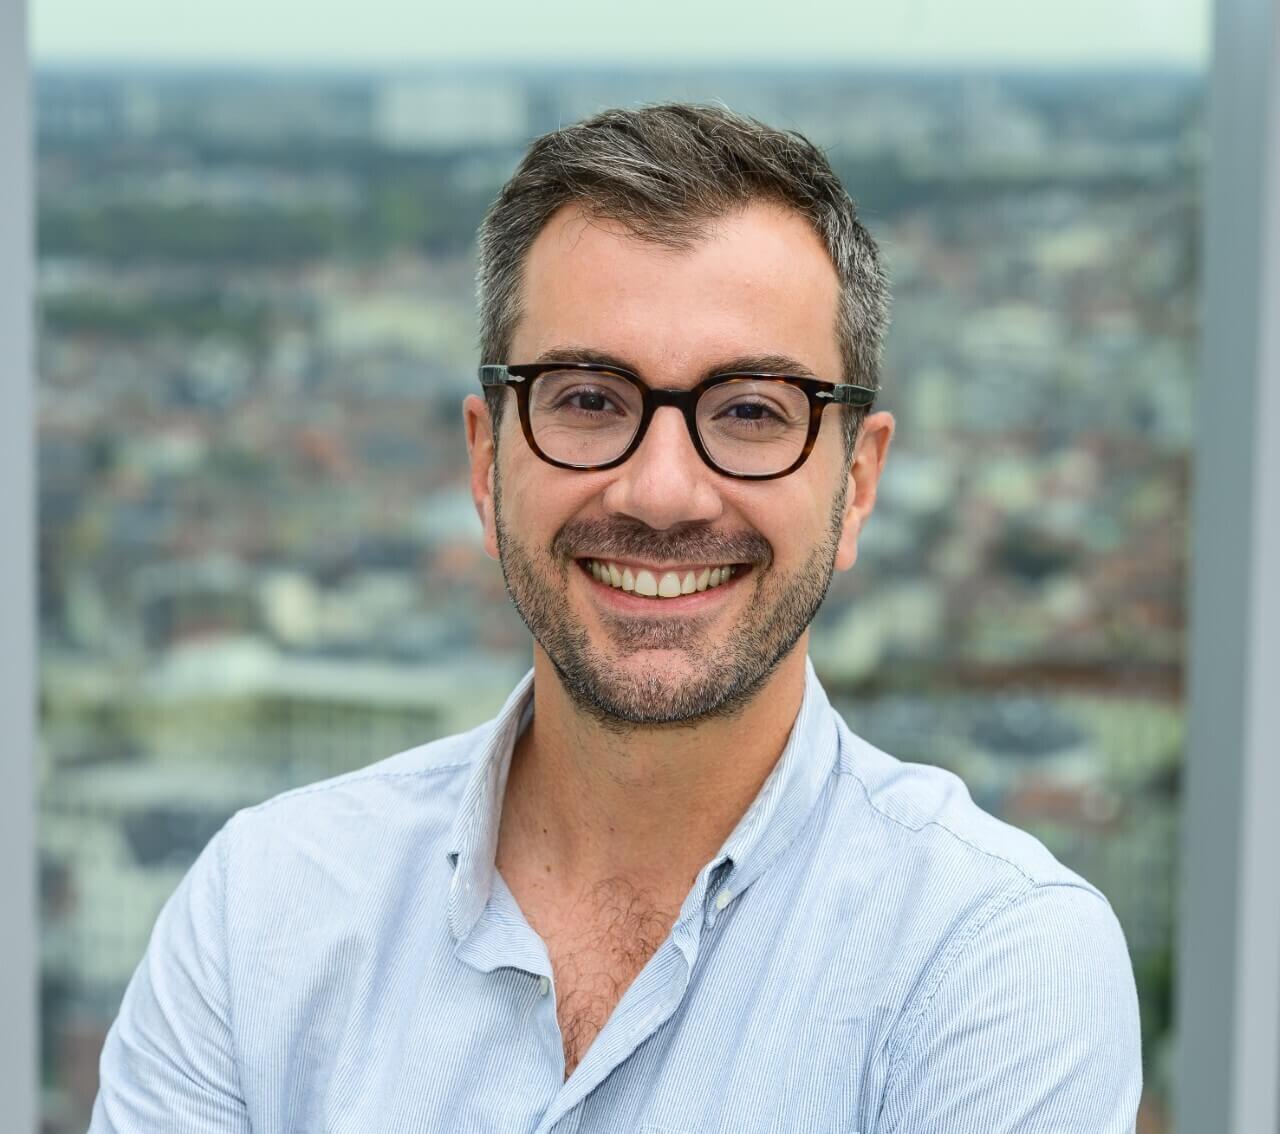 Martin Lefrancq is New Mobility Policy Advisor @ Brussels Mobility